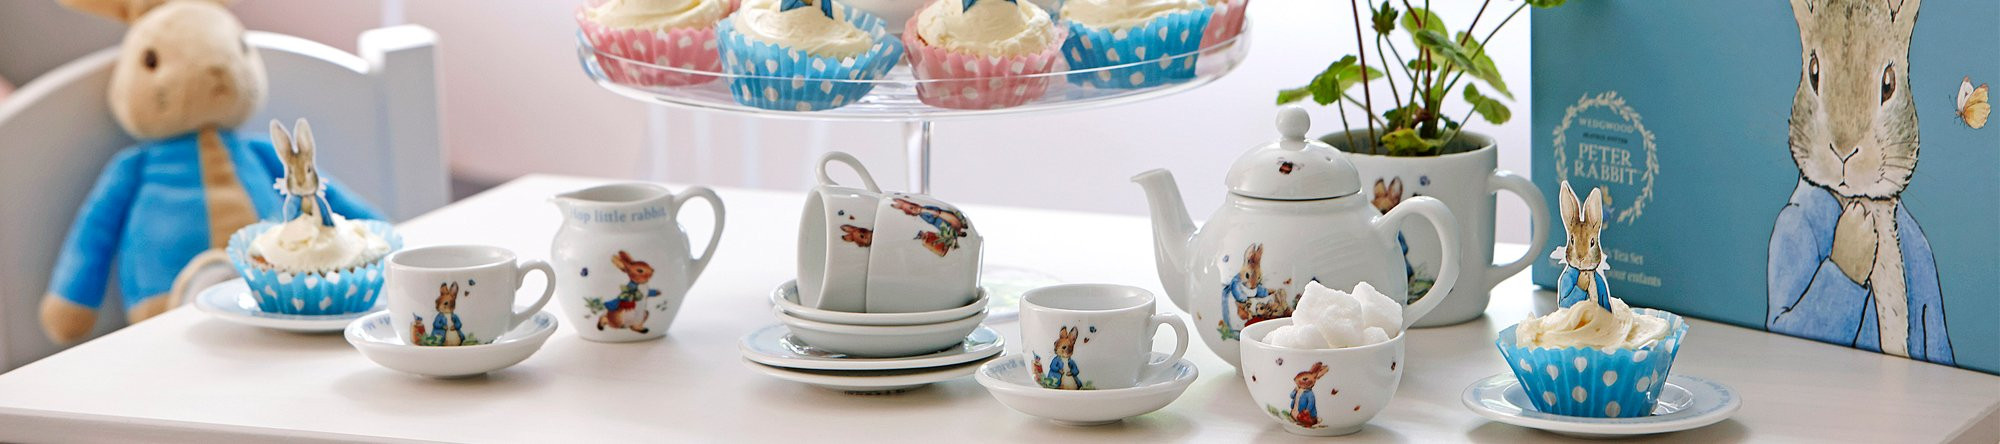 Easter Tea Party Ideas
 Easter Ideas For Hosting A Children s Tea Party That